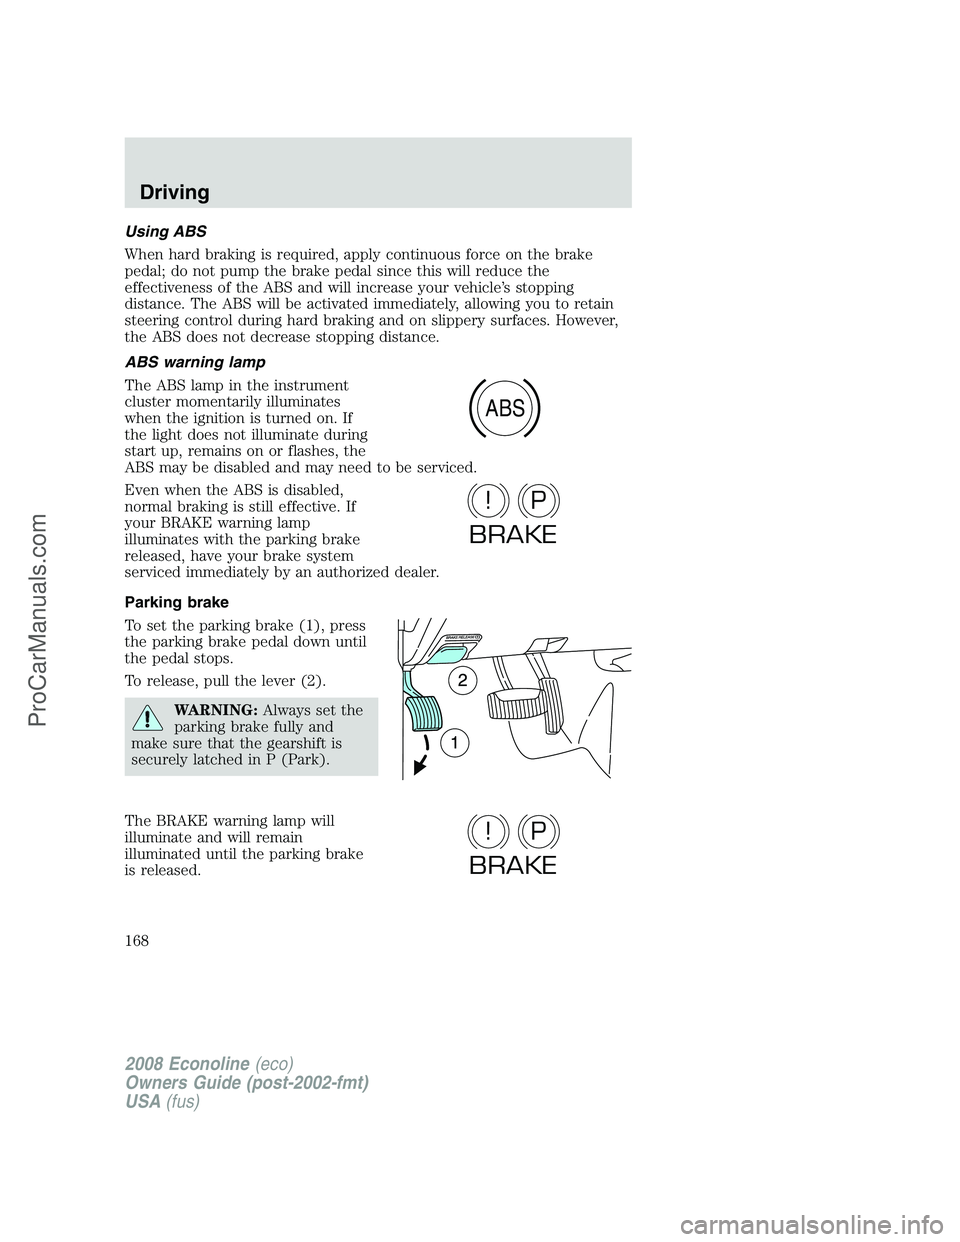 FORD ECONOLINE 2008 Owners Manual Using ABS
When hard braking is required, apply continuous force on the brake
pedal; do not pump the brake pedal since this will reduce the
effectiveness of the ABS and will increase your vehicle’s s